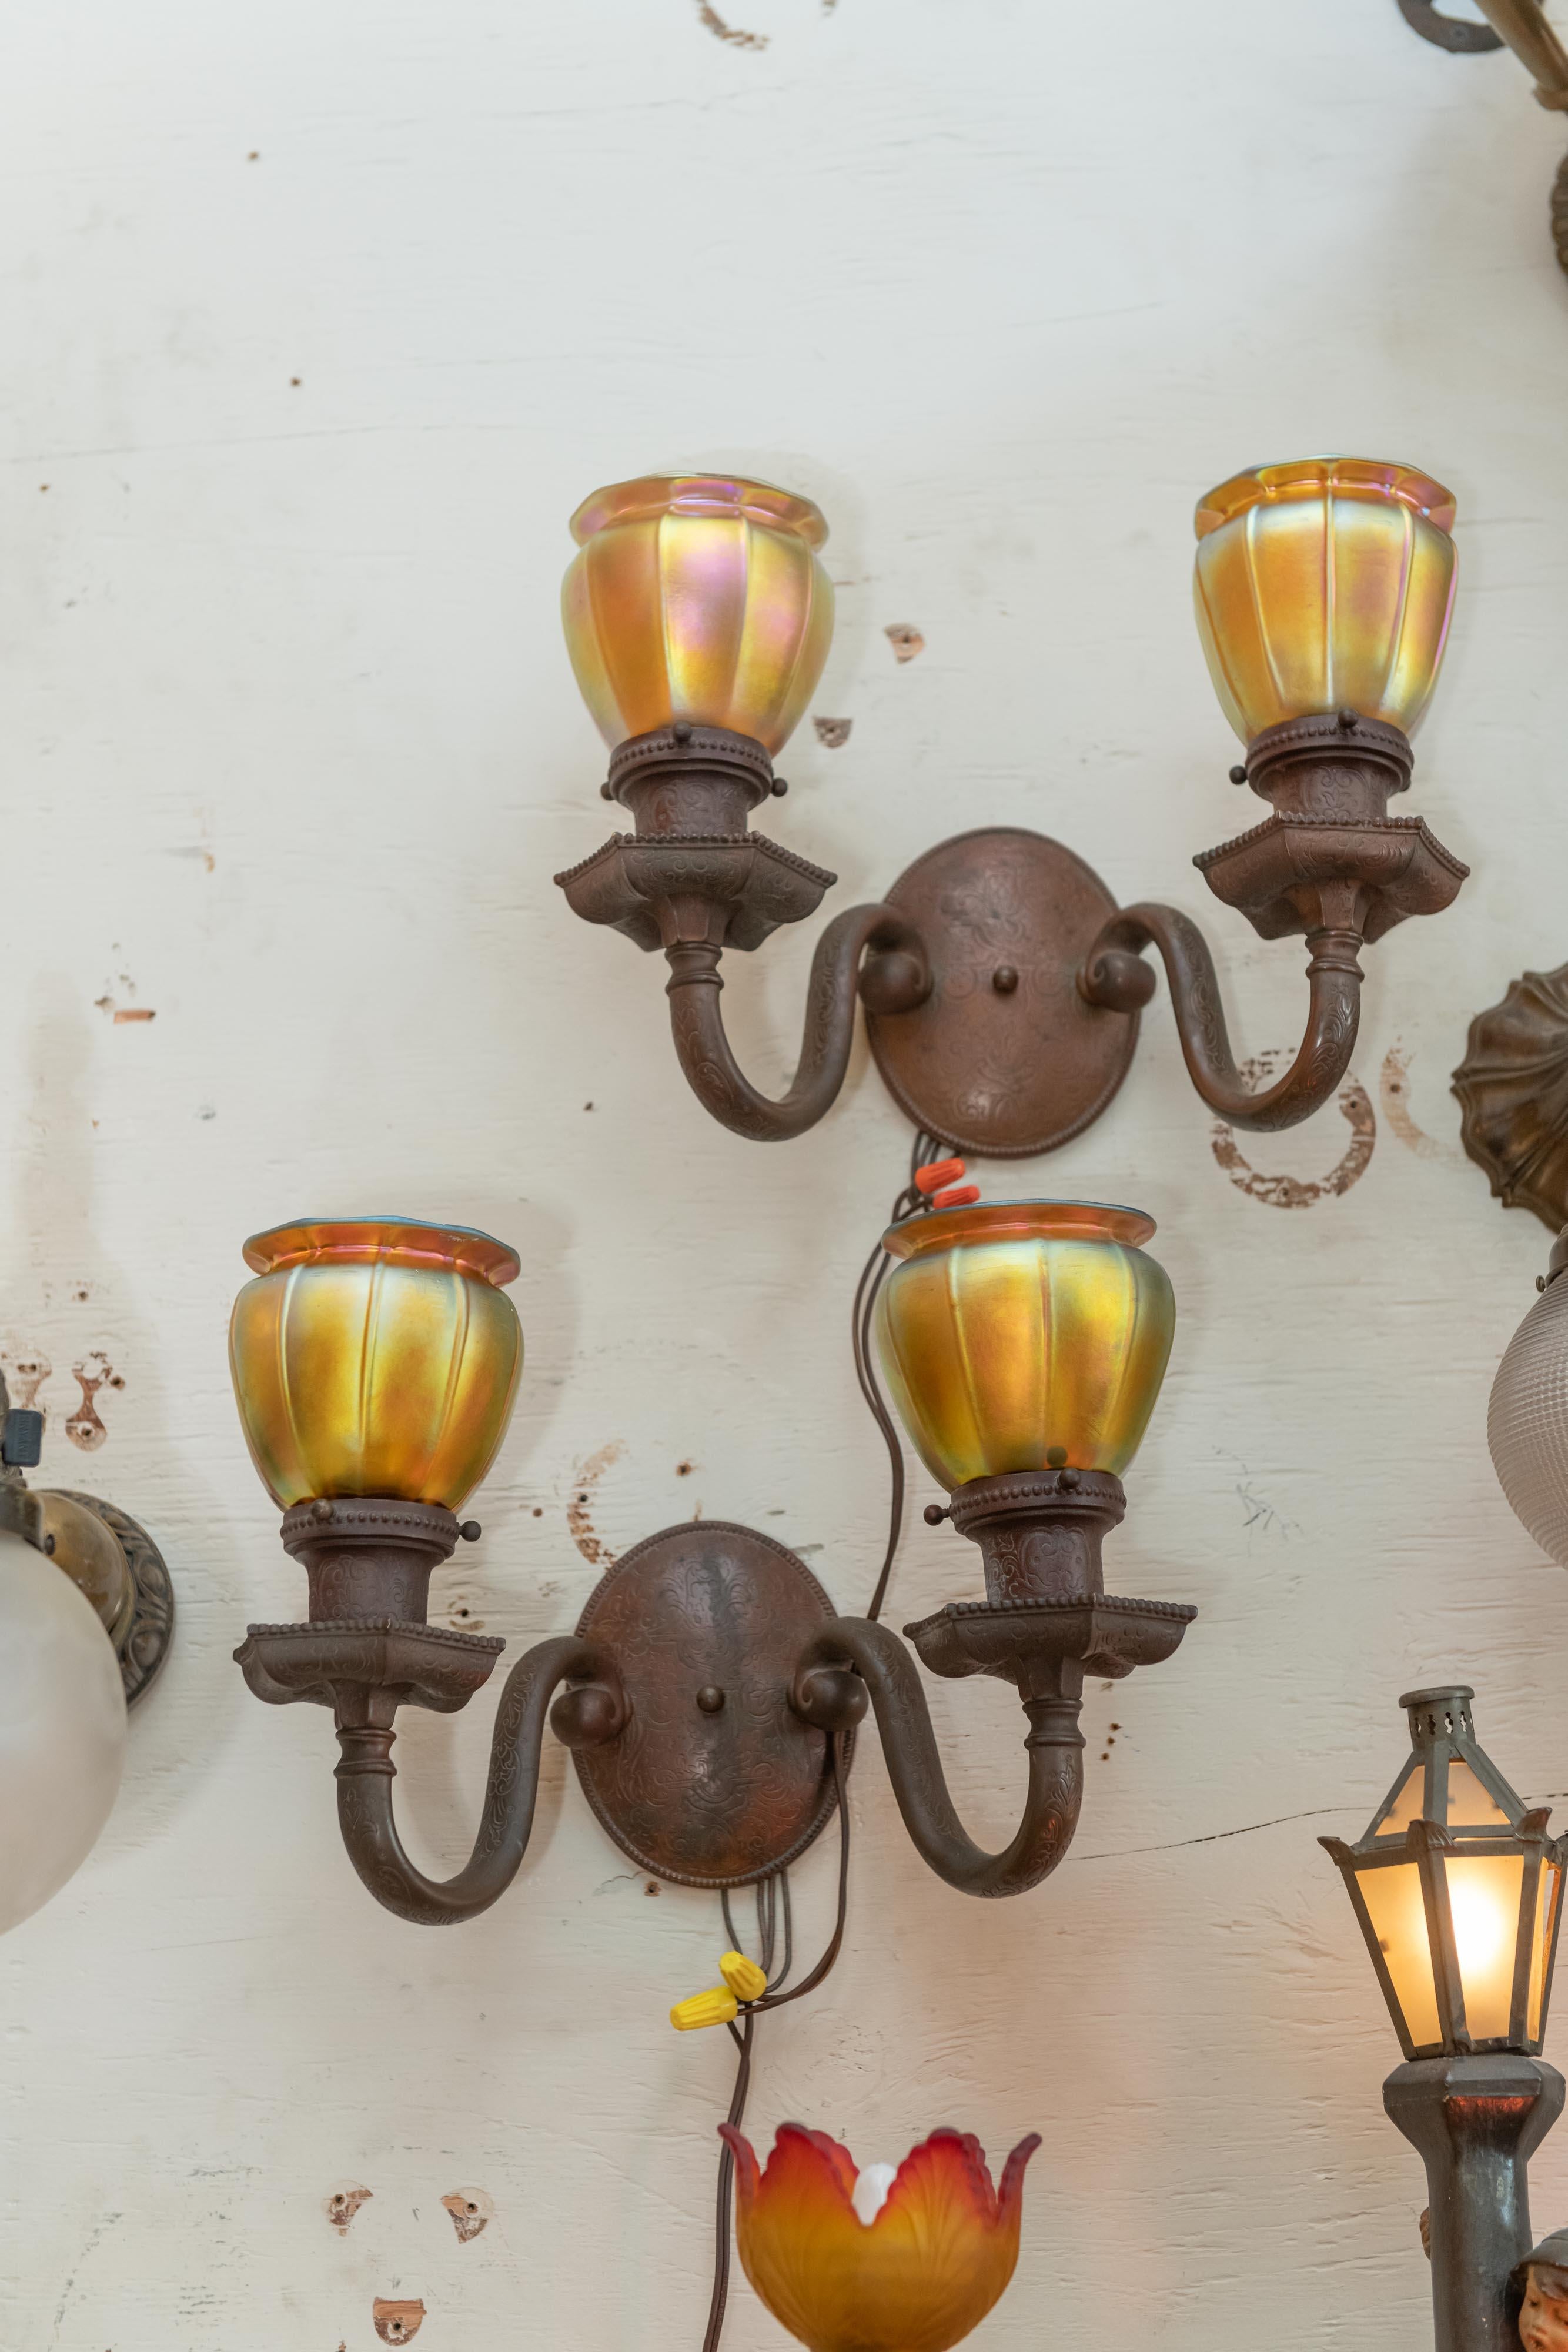 The metal work on these sconces did as much as can be done to bring us a fine example of craftsmanship. Please note all the etching on the arms, the body, the bobeche, and even the shade holders. We have sold many sconces, but we can't say we have